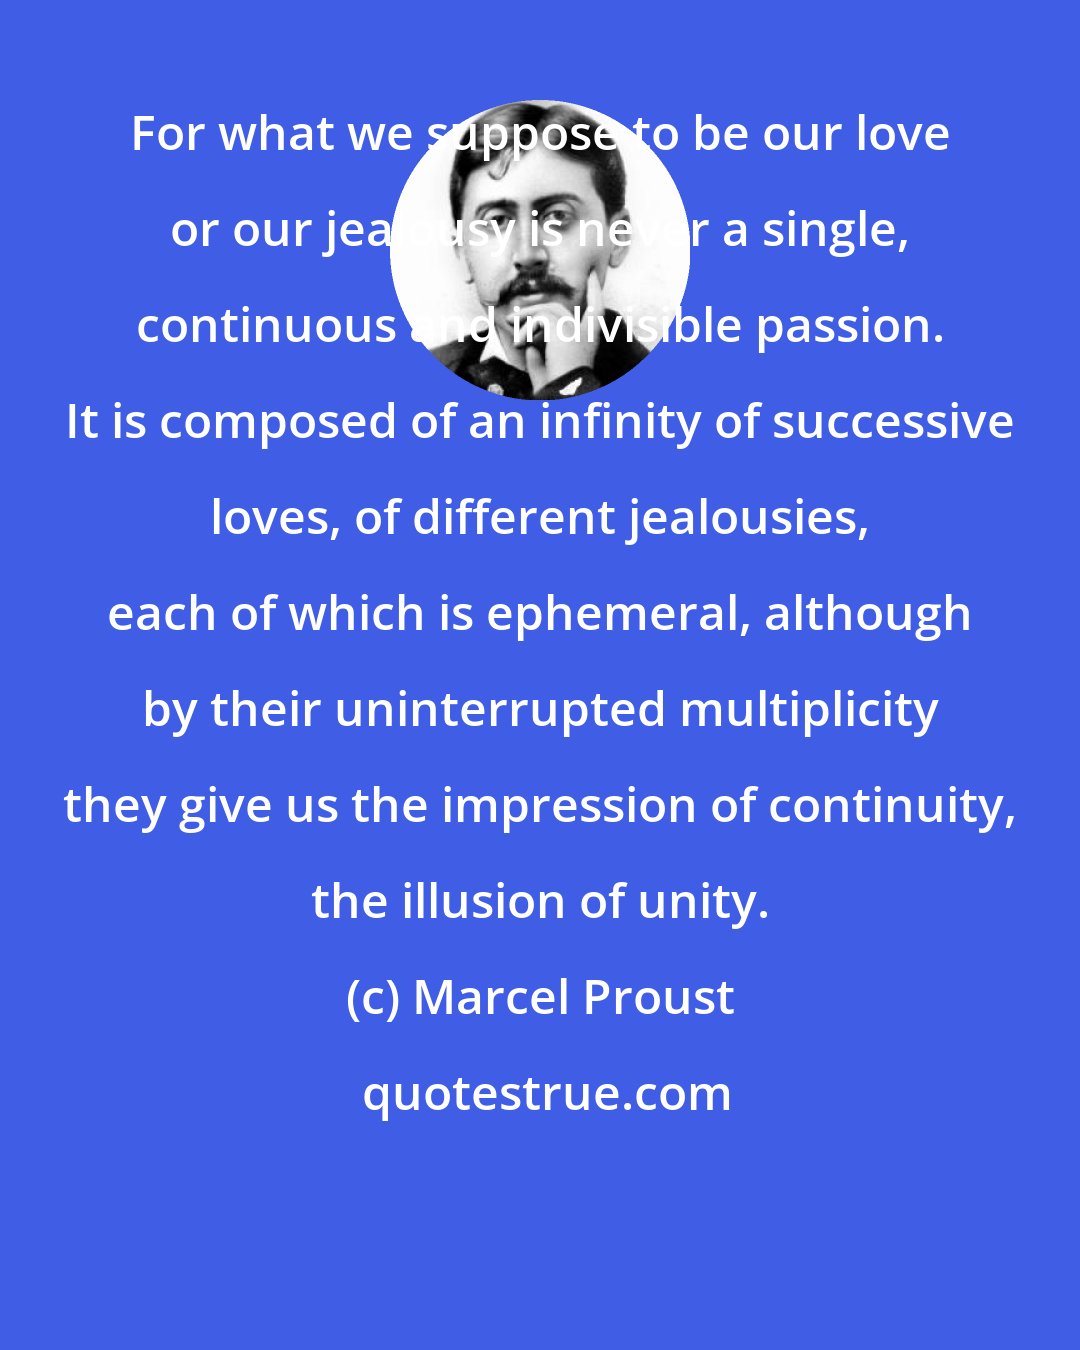 Marcel Proust: For what we suppose to be our love or our jealousy is never a single, continuous and indivisible passion. It is composed of an infinity of successive loves, of different jealousies, each of which is ephemeral, although by their uninterrupted multiplicity they give us the impression of continuity, the illusion of unity.